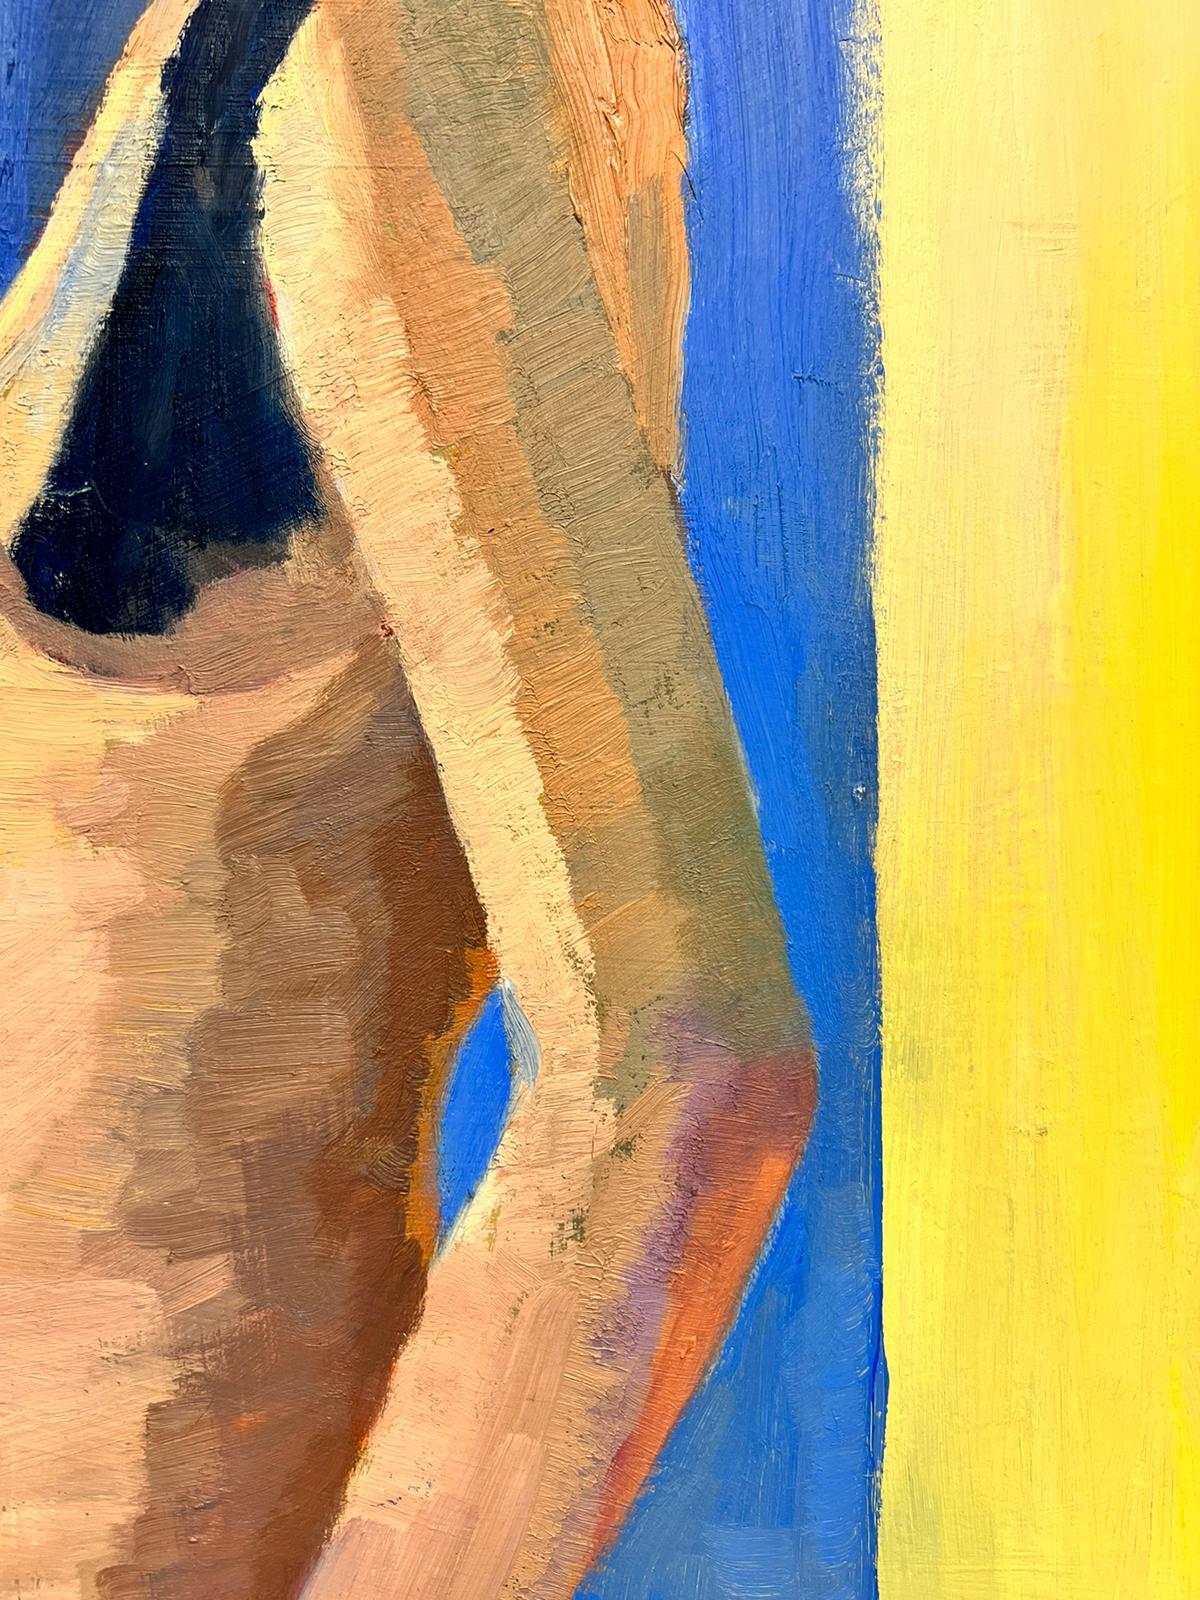 Contemporary British Oil Portrait of a Nude Lady Blue & Yellow background colors - Painting by Jill Jackson